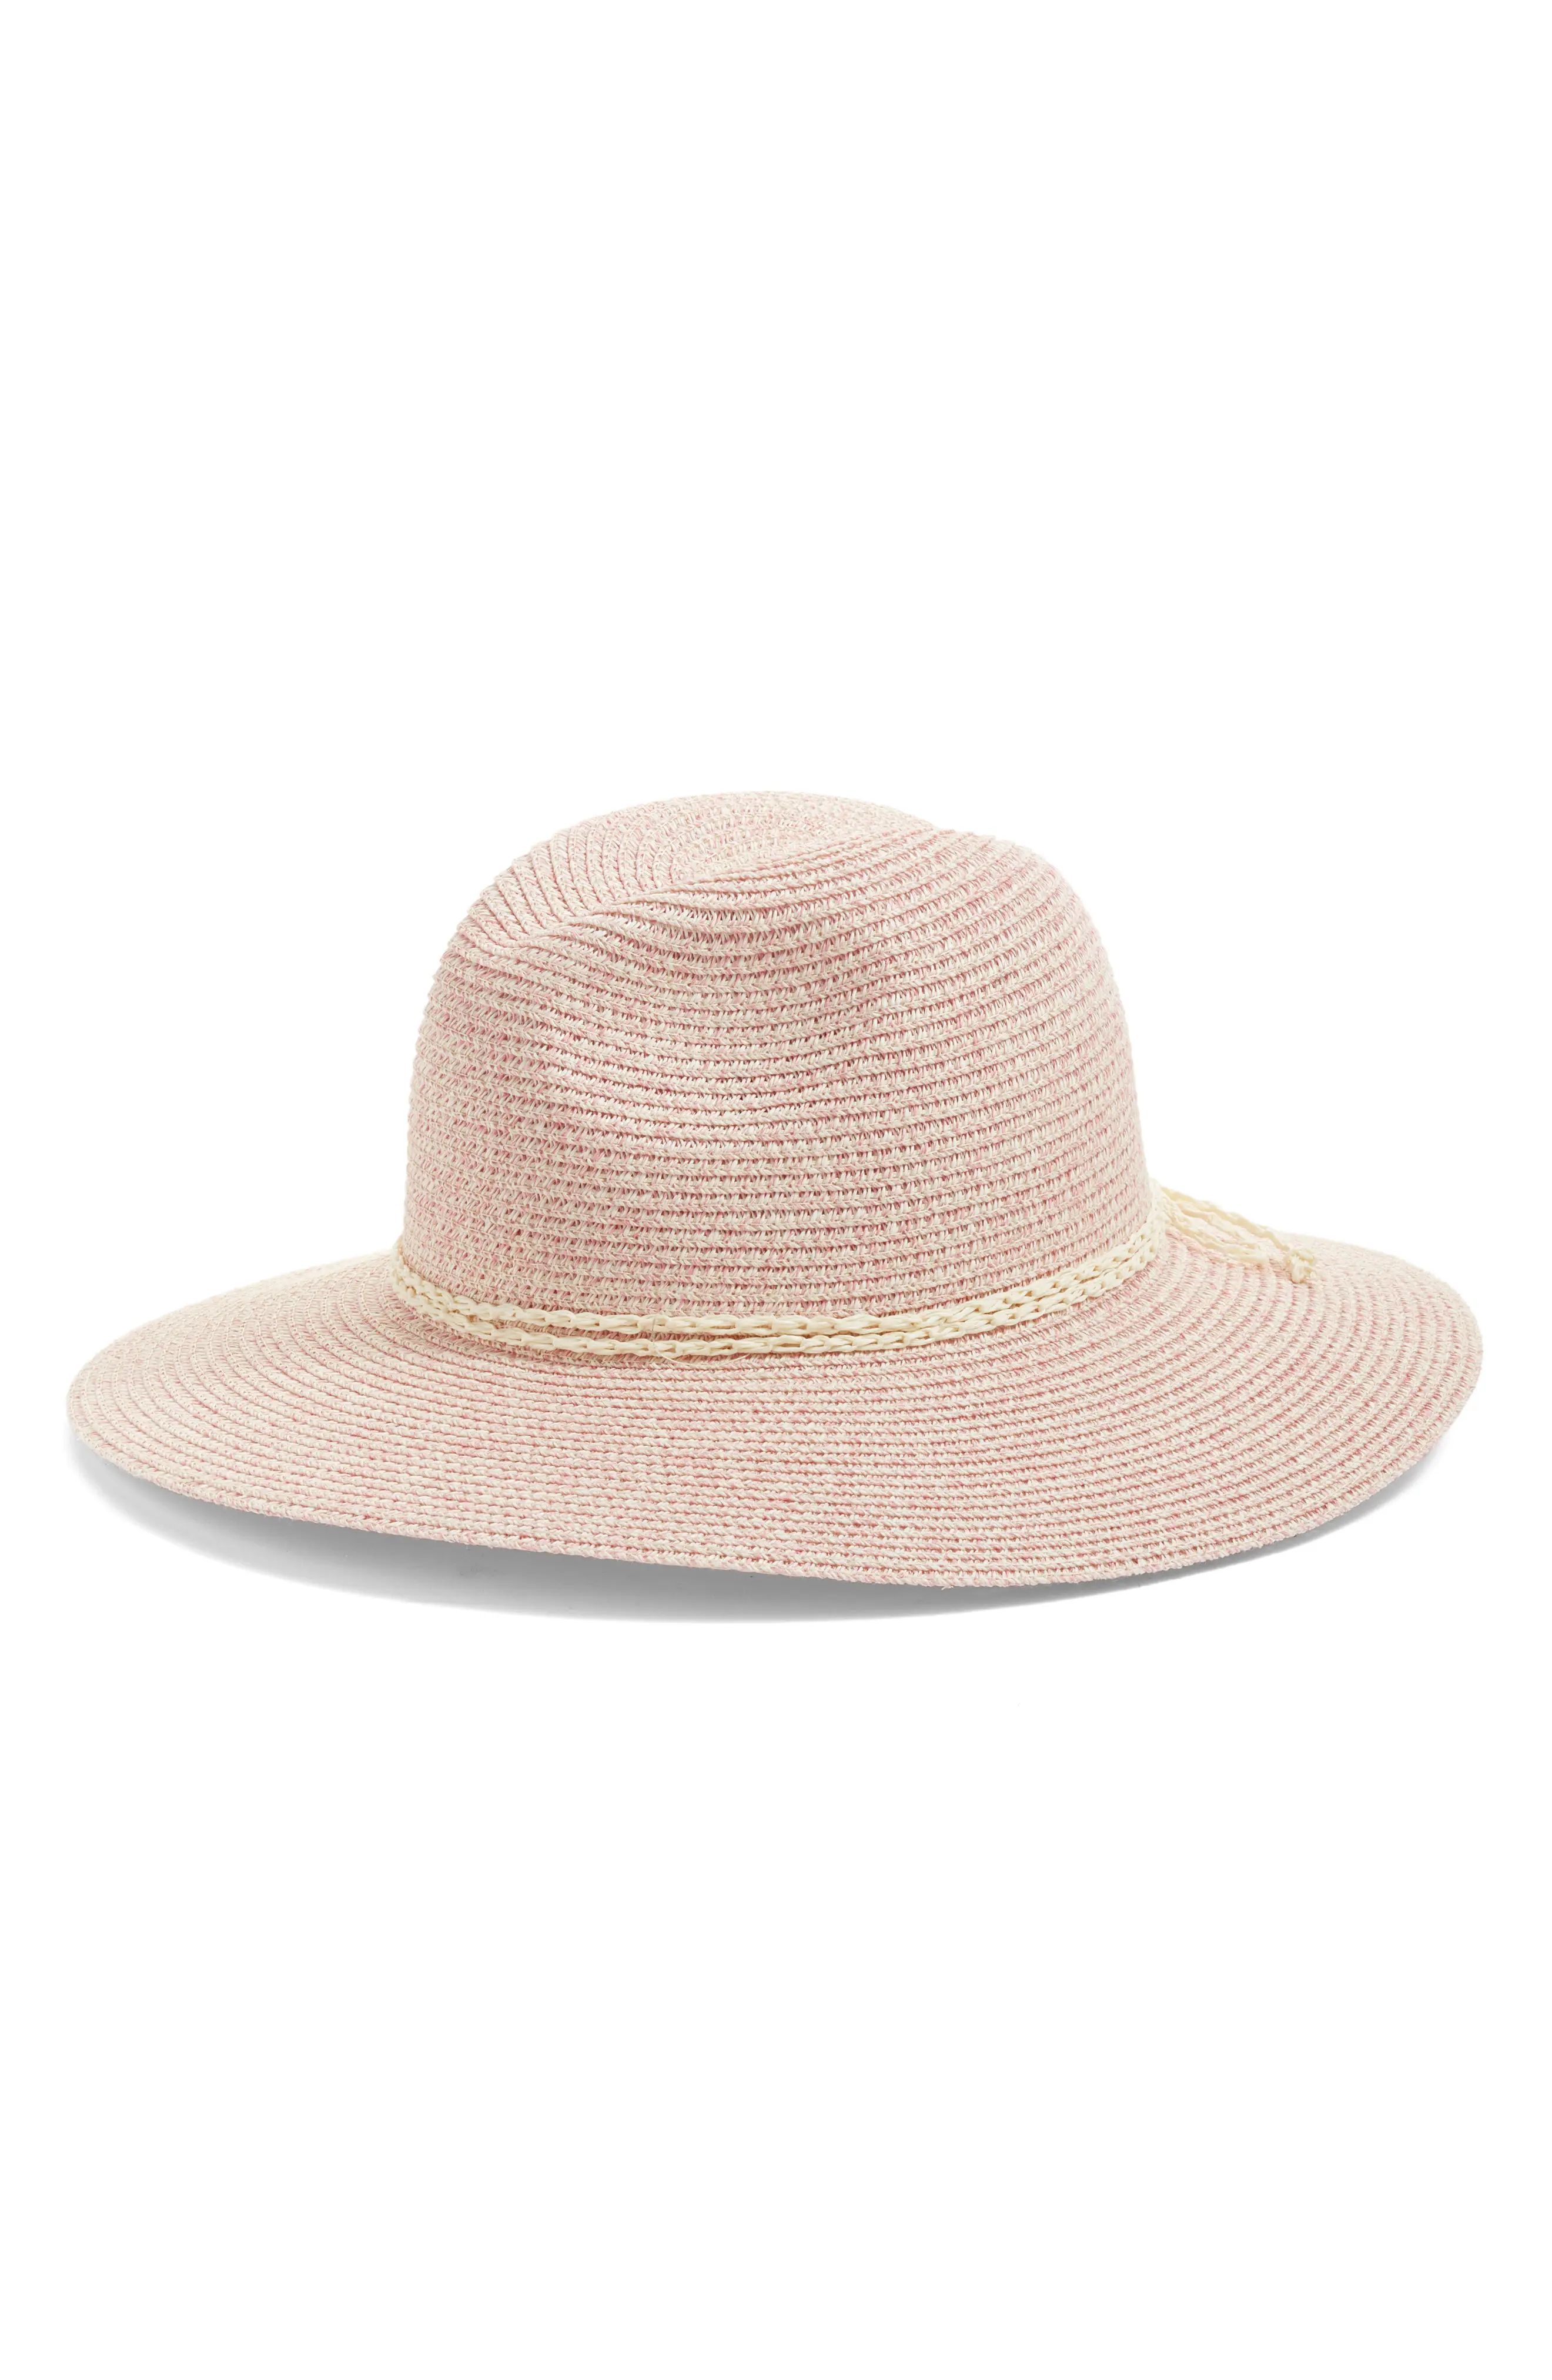 Nordstrom Packable Panama Hat in Mauve Combo at Nordstrom | Nordstrom